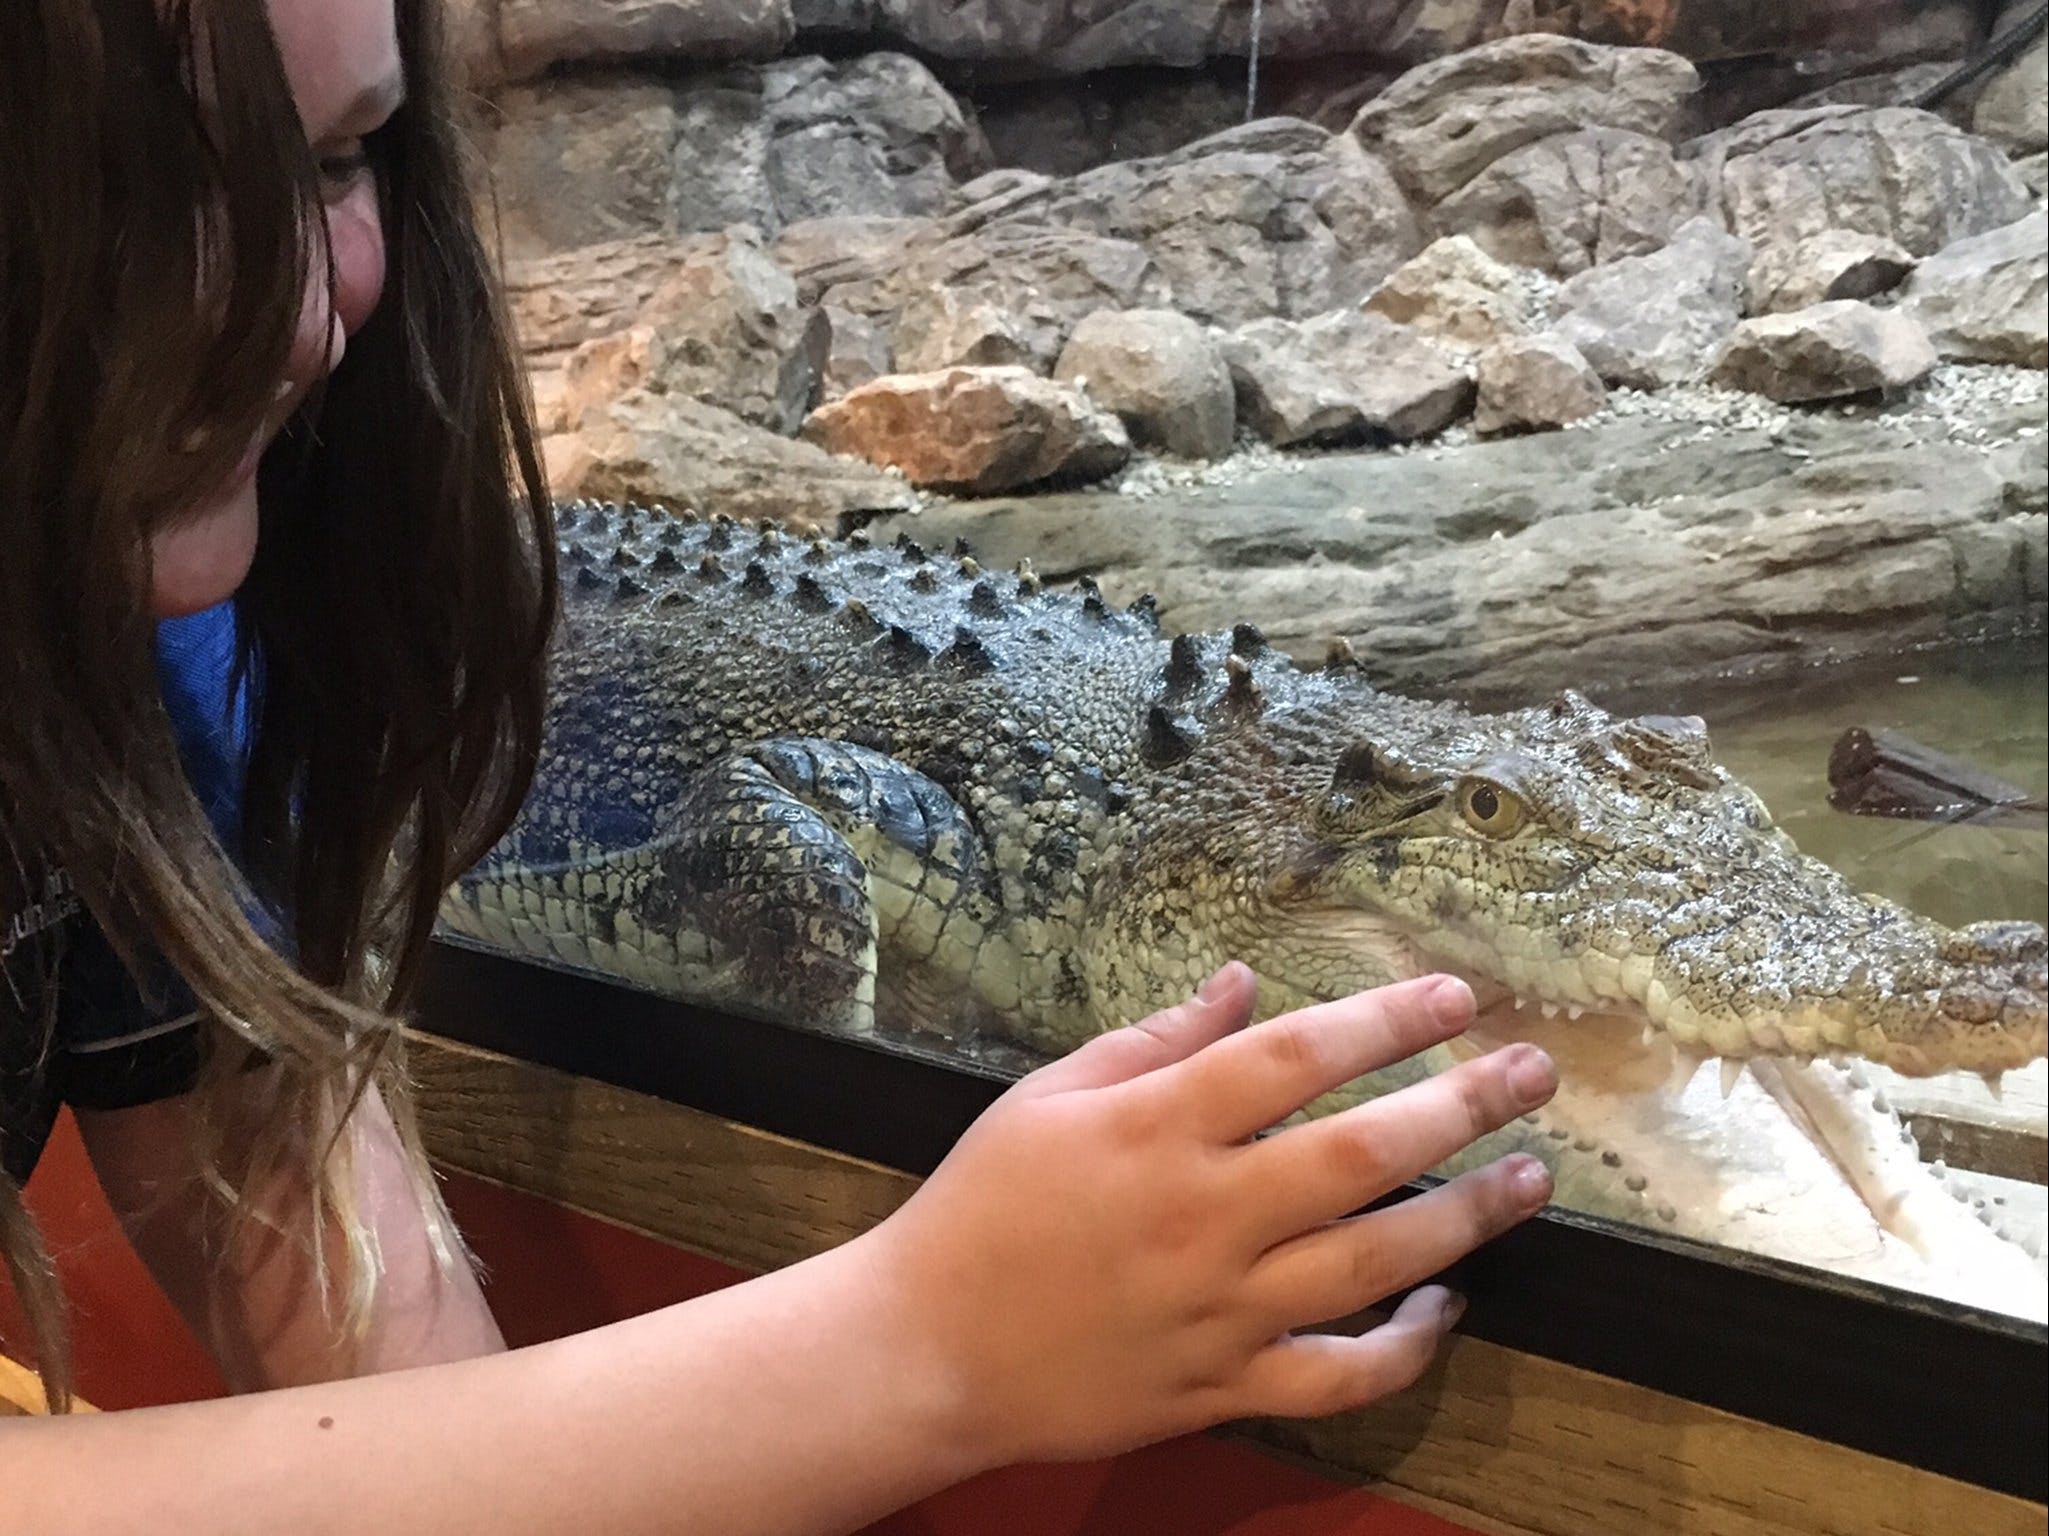 Canberra Reptile Zoo - Broome Tourism